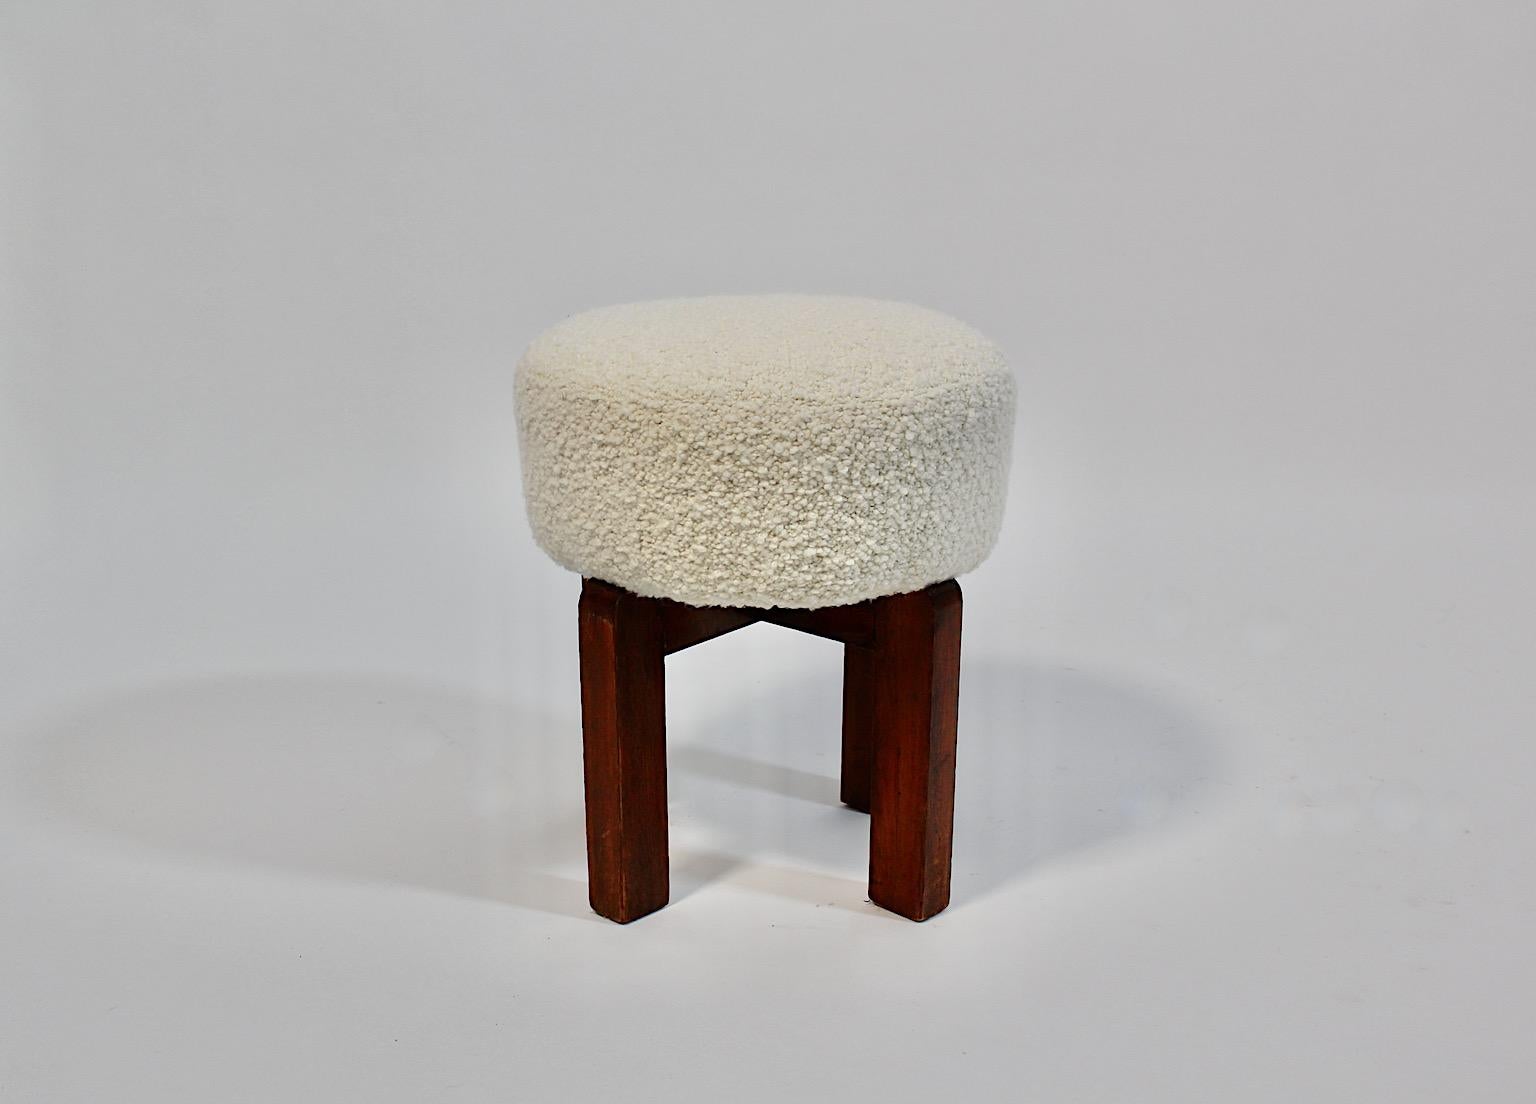 Art Deco Vintage circular stool or ottoman from stained beech and cream white fabric 1930s Vienna.
A stunning vintage stool circular like with for rectangular feet from stained beech in good original condition.
While the feet show good condition